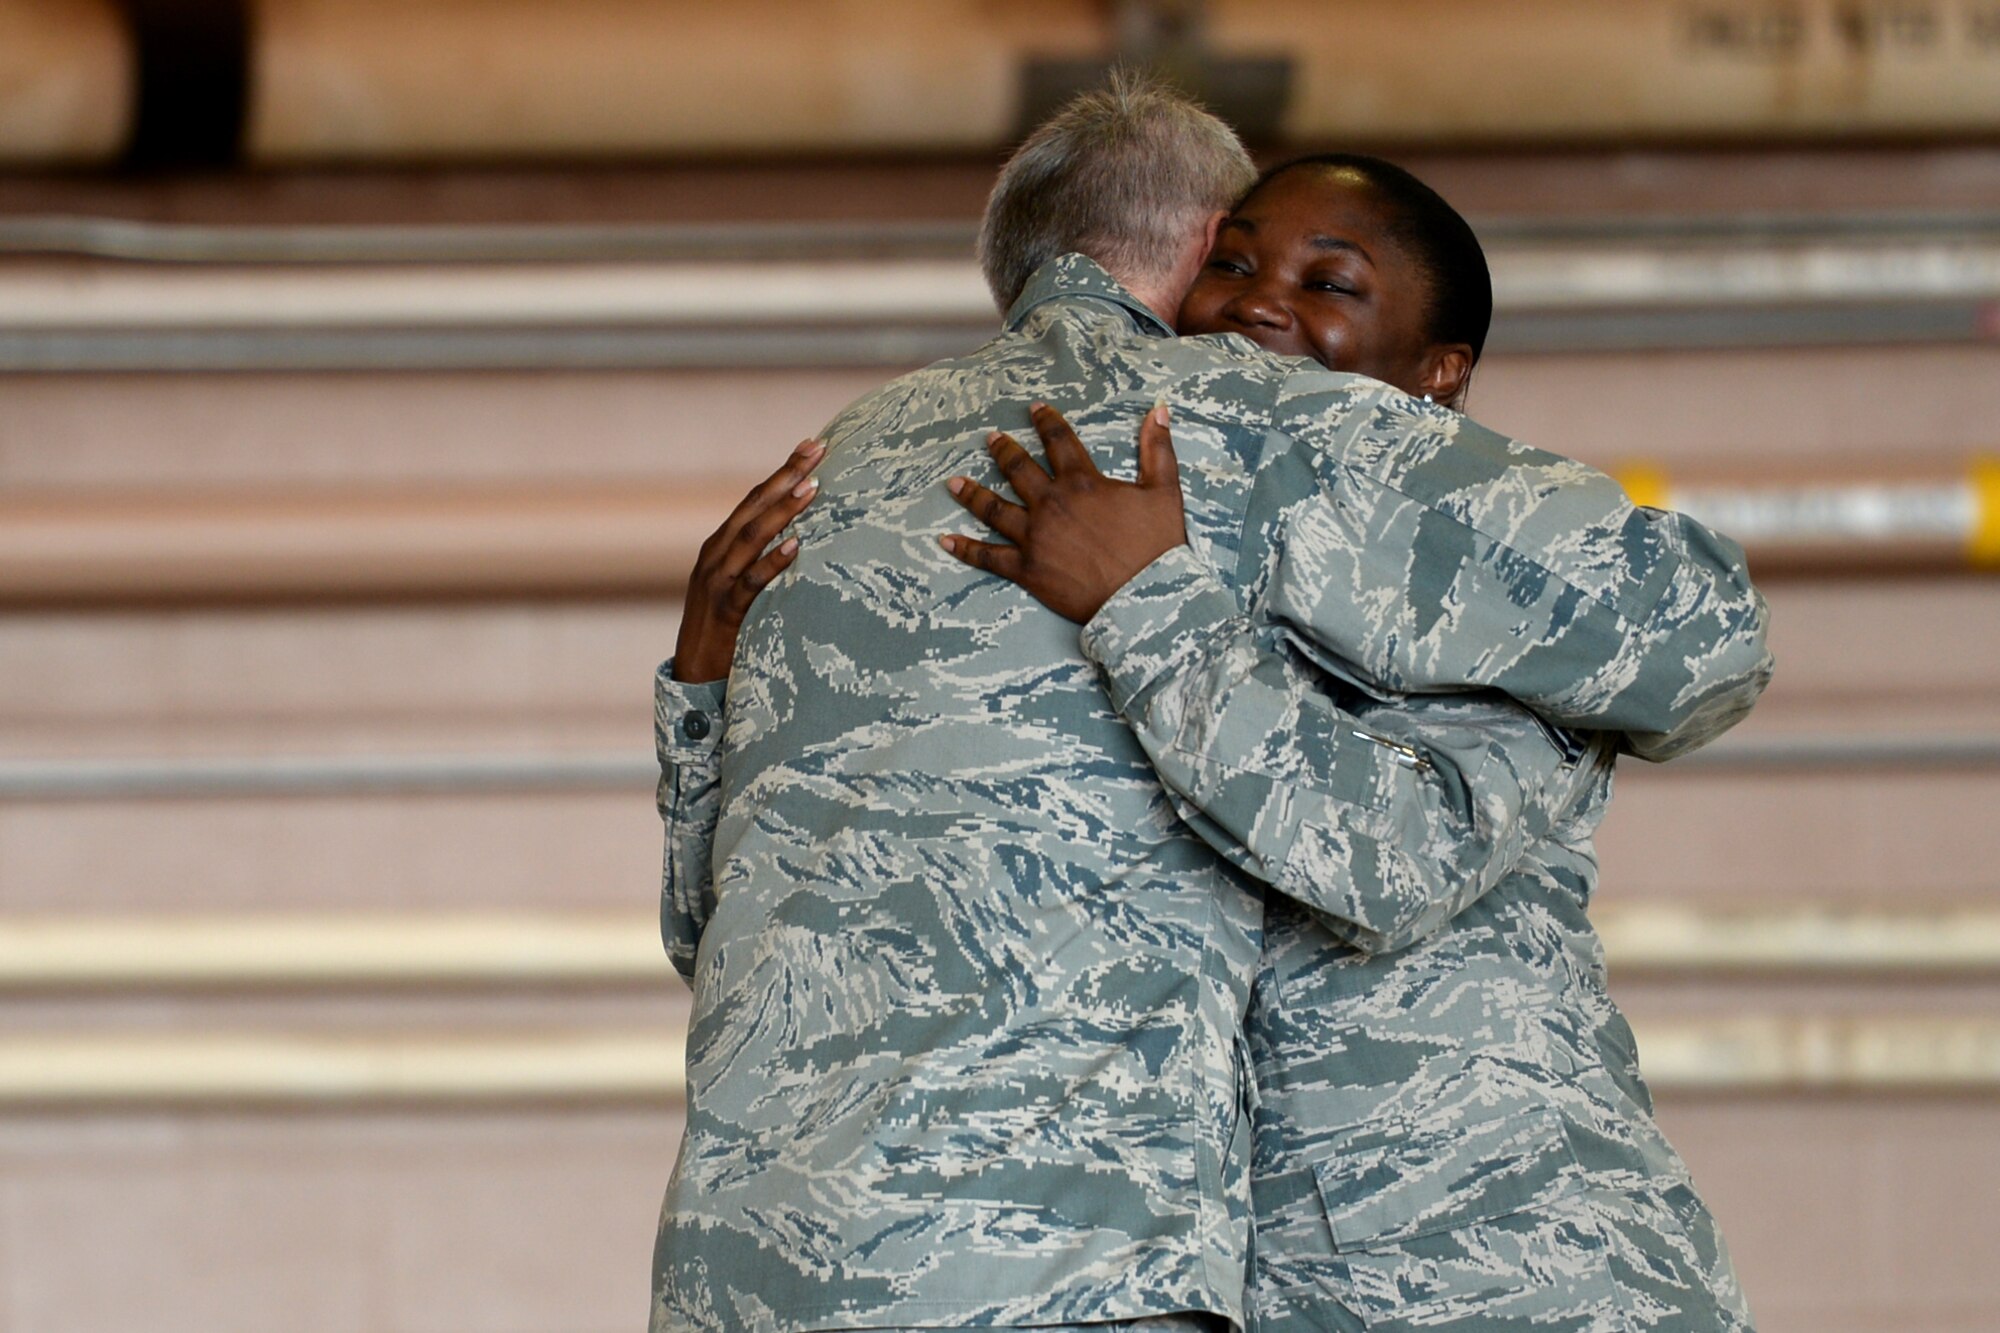 Lt. Gen. Darryl Roberson, Air Education and Training Command commander, hugs Master Sgt. Raneisha Russum, 82nd Force Support Squadron, manpower superintendent, after sharing her story of resiliency at Sheppard Air Force Base, Texas, June 29, 2016. The general was personally inspired by her story and recognized her during an all call with more than 3,000 Airmen. (U.S. Air Force photo by Senior Airman Kyle E. Gese)